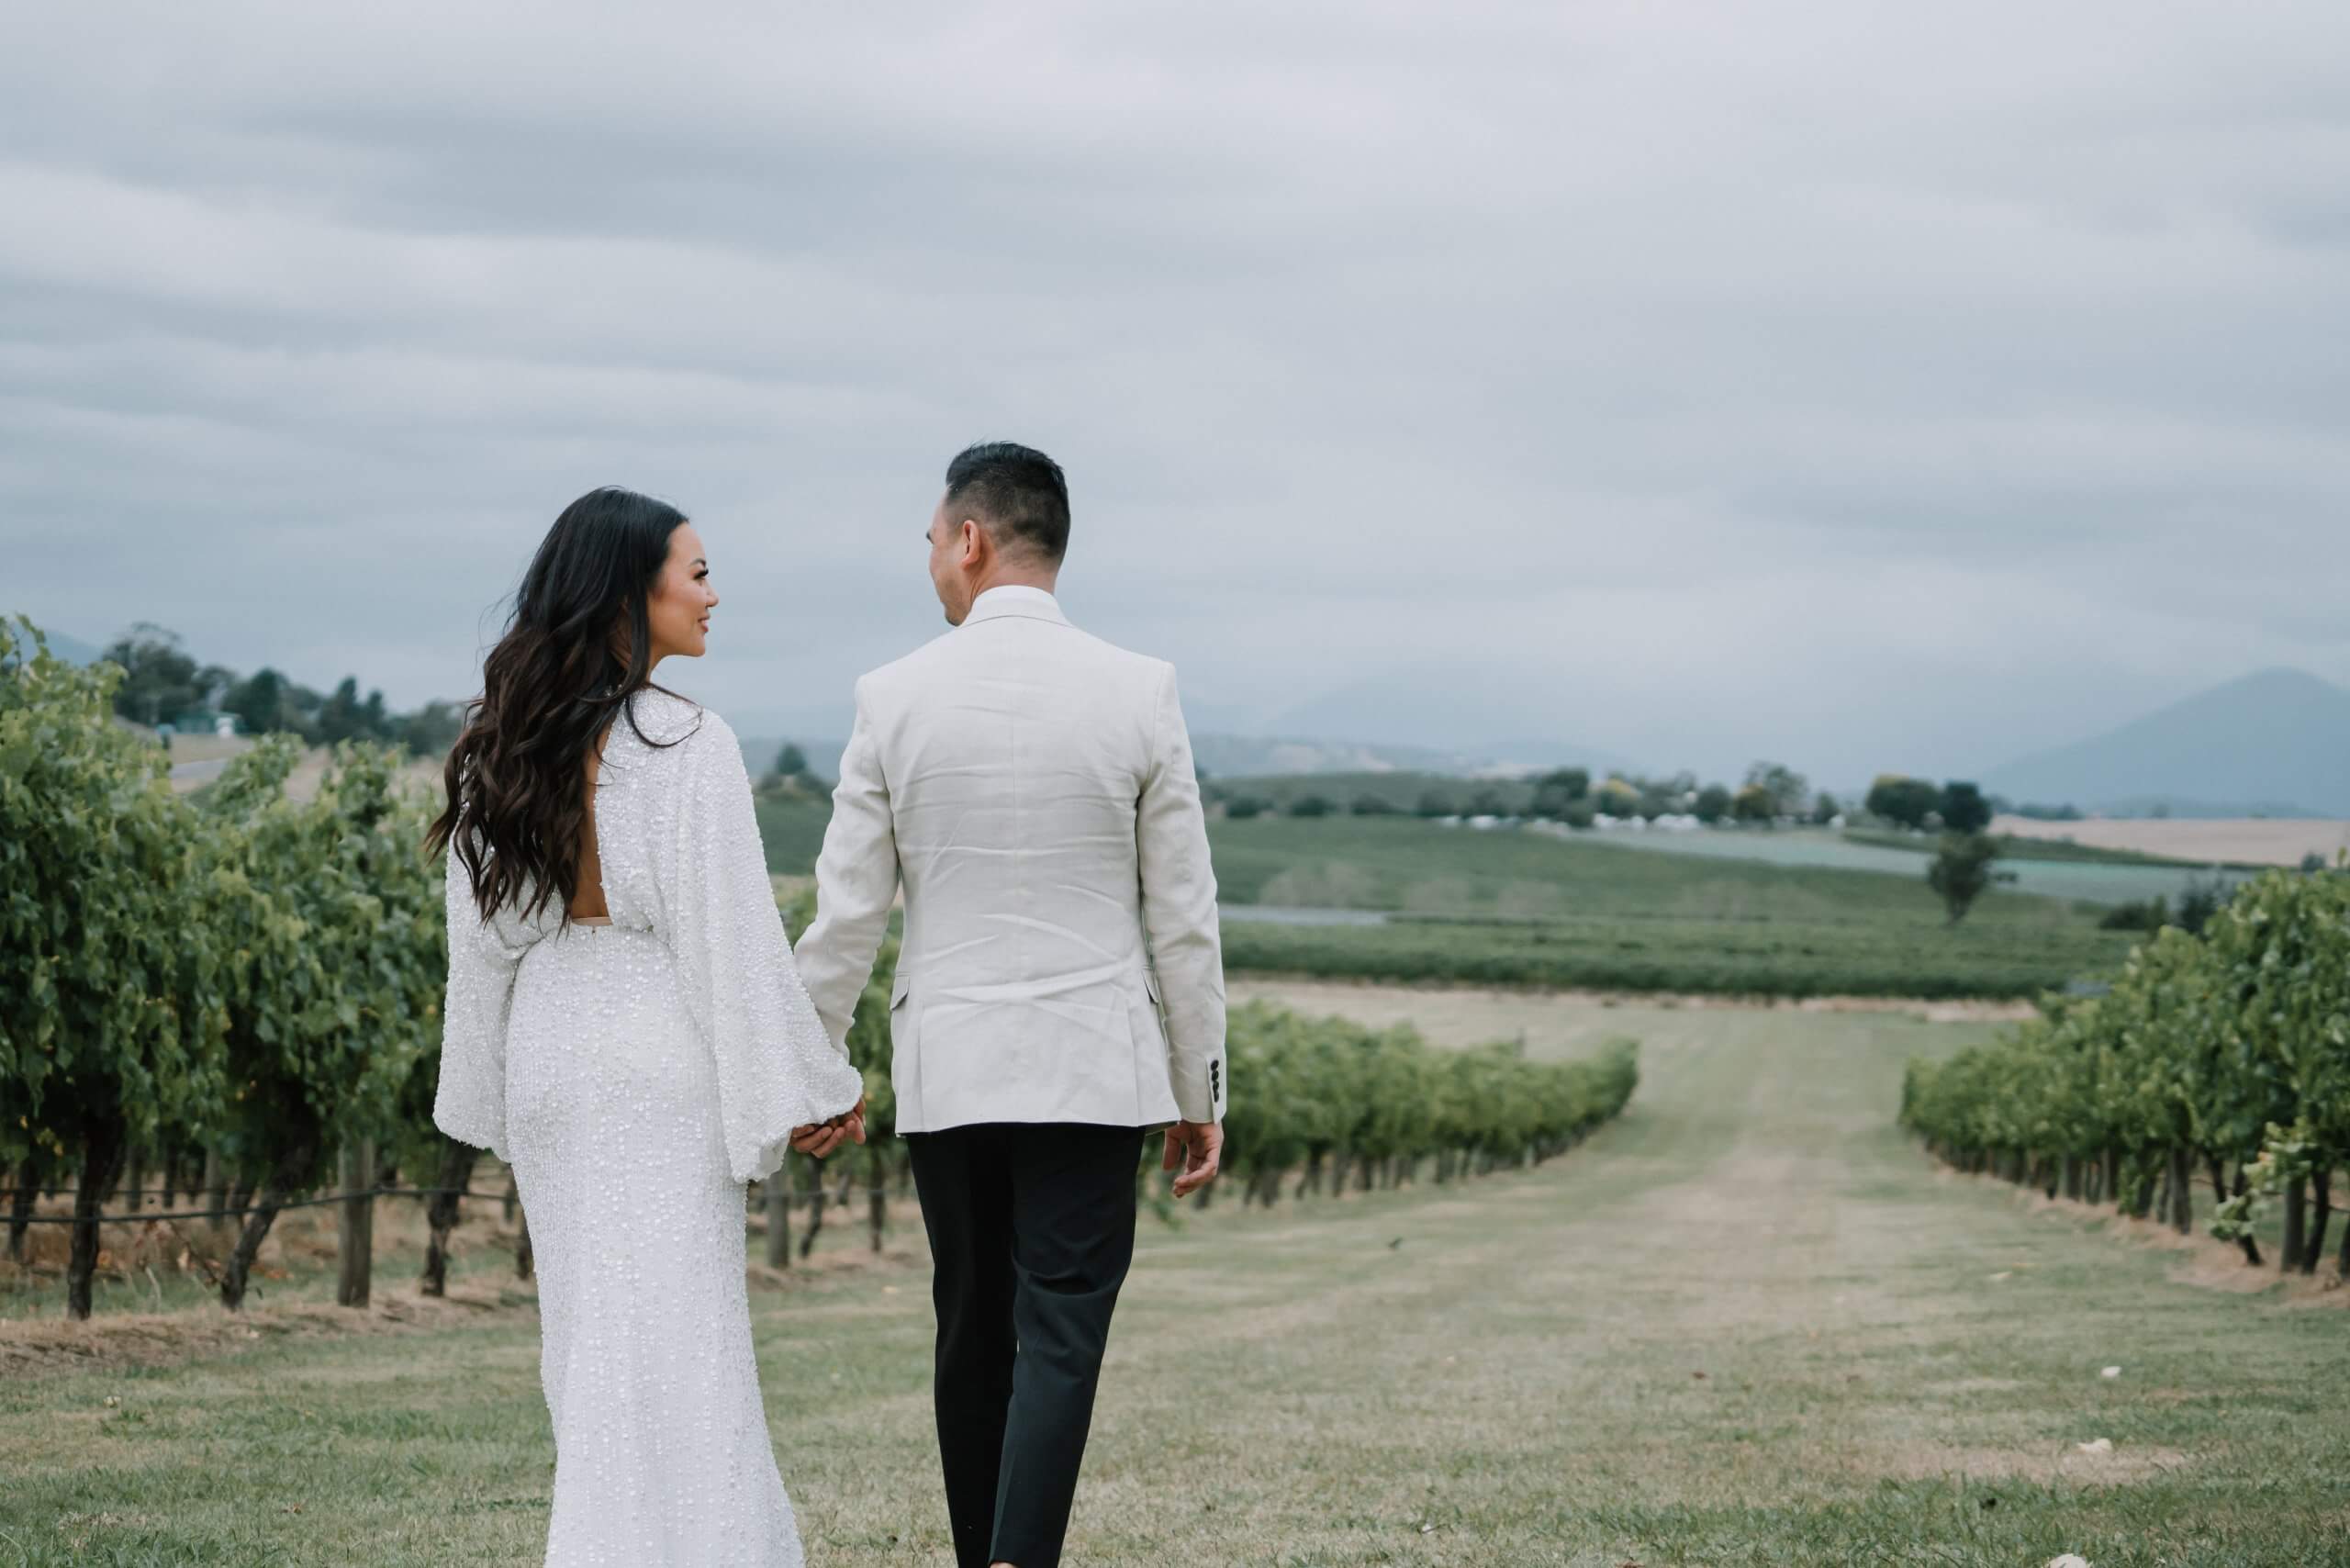 Bride and Groom enjoying the beautiful field. Captured by Black Avenue Productions